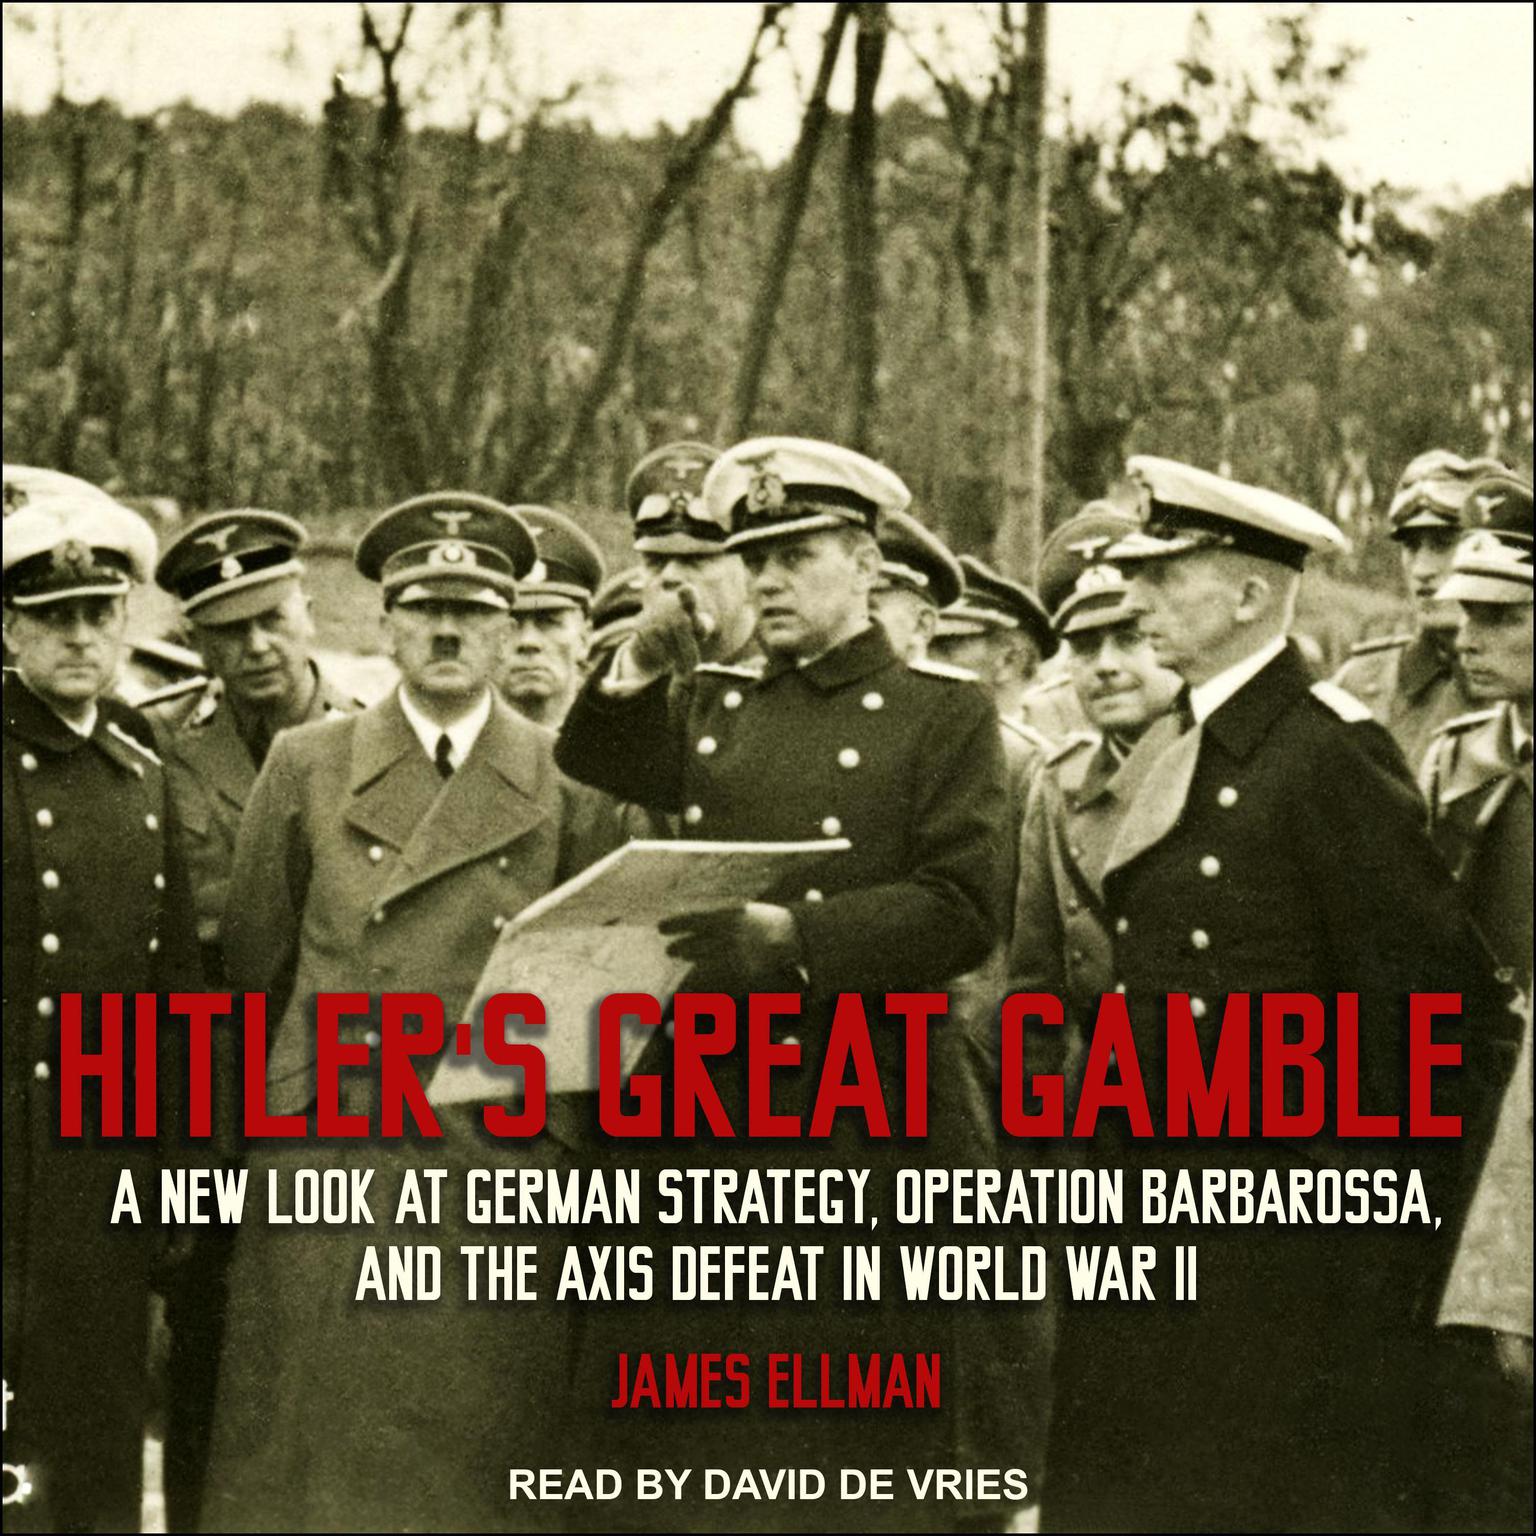 Hitlers Great Gamble: A New Look at German Strategy, Operation Barbarossa, and the Axis Defeat in World War II Audiobook, by James Ellman